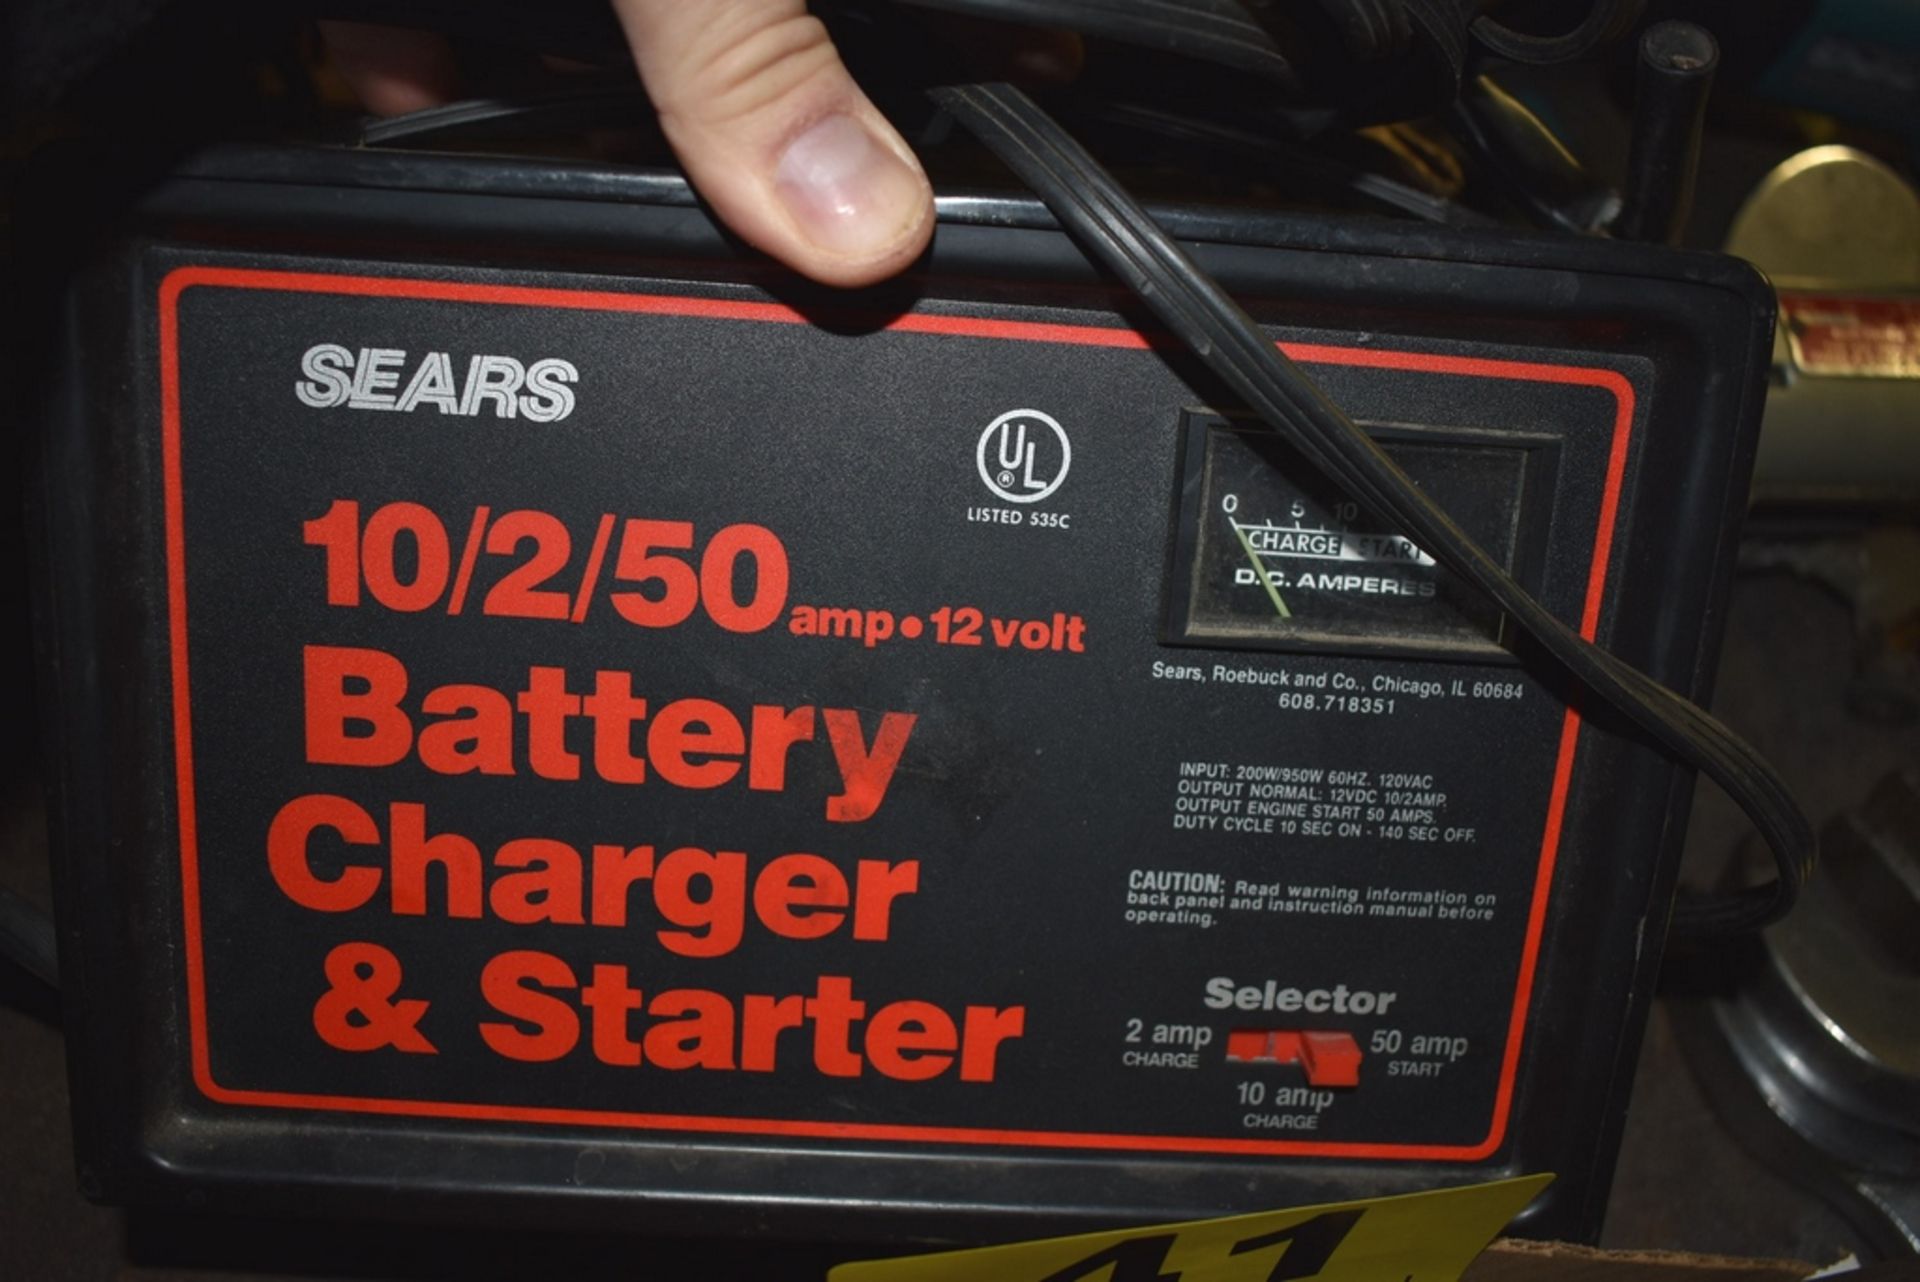 SEARS 10/2/50 BATTERY CHARGER